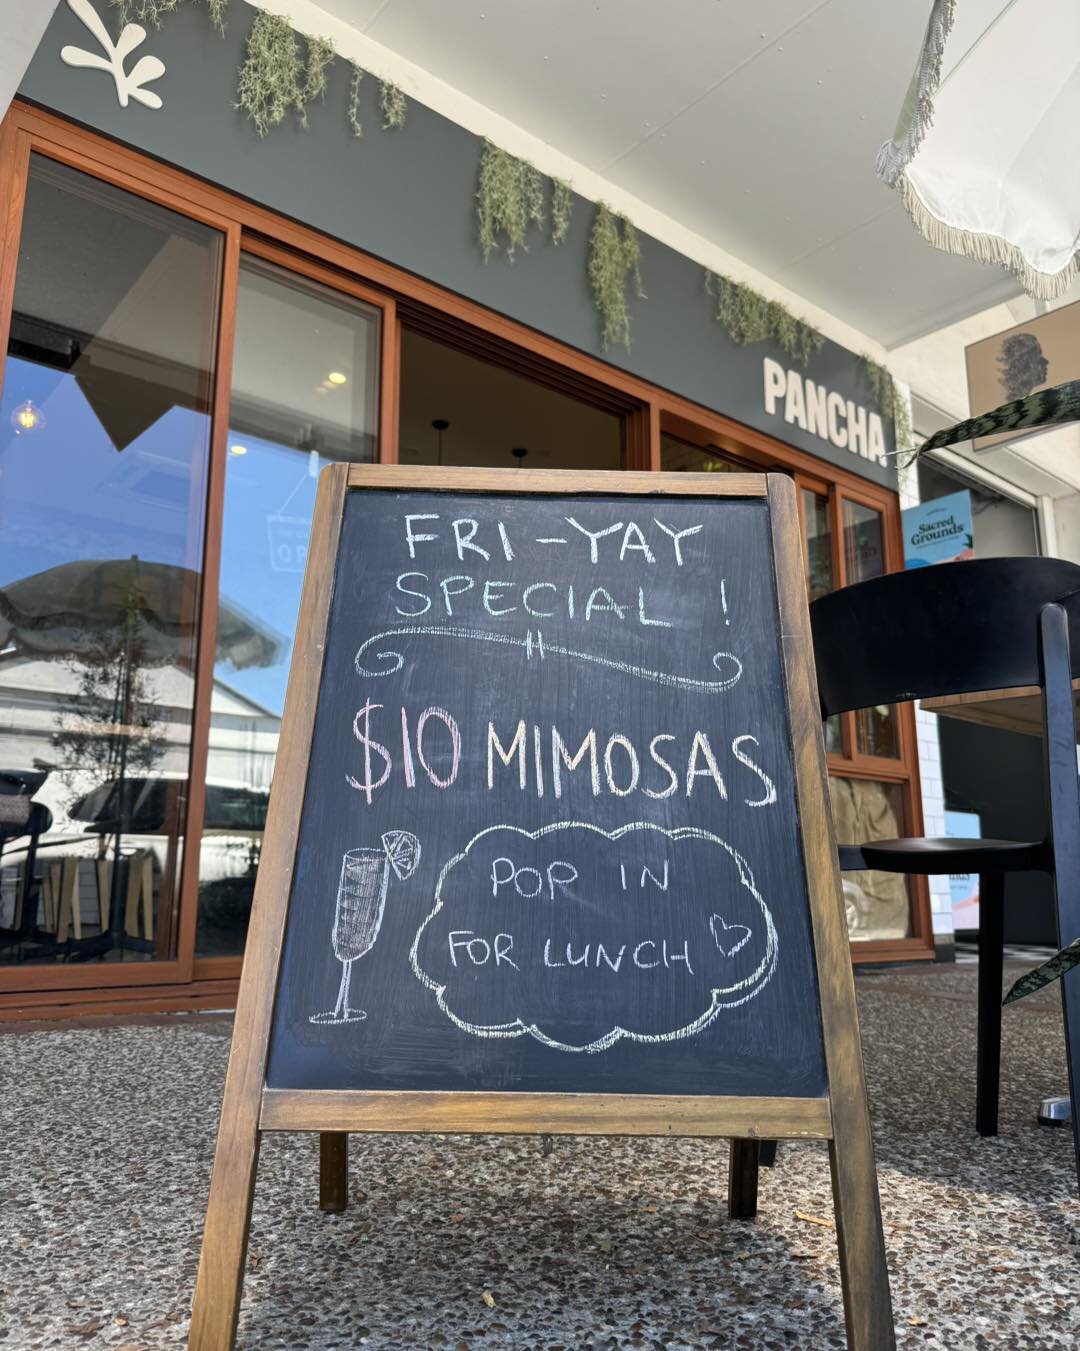 Mimosa anyone? They so cute and they taste even better with your all day brekky or all day lunch 🤗
.
.
.
#lunchspecial #brisbanecafe #fun #yummy  #friyay